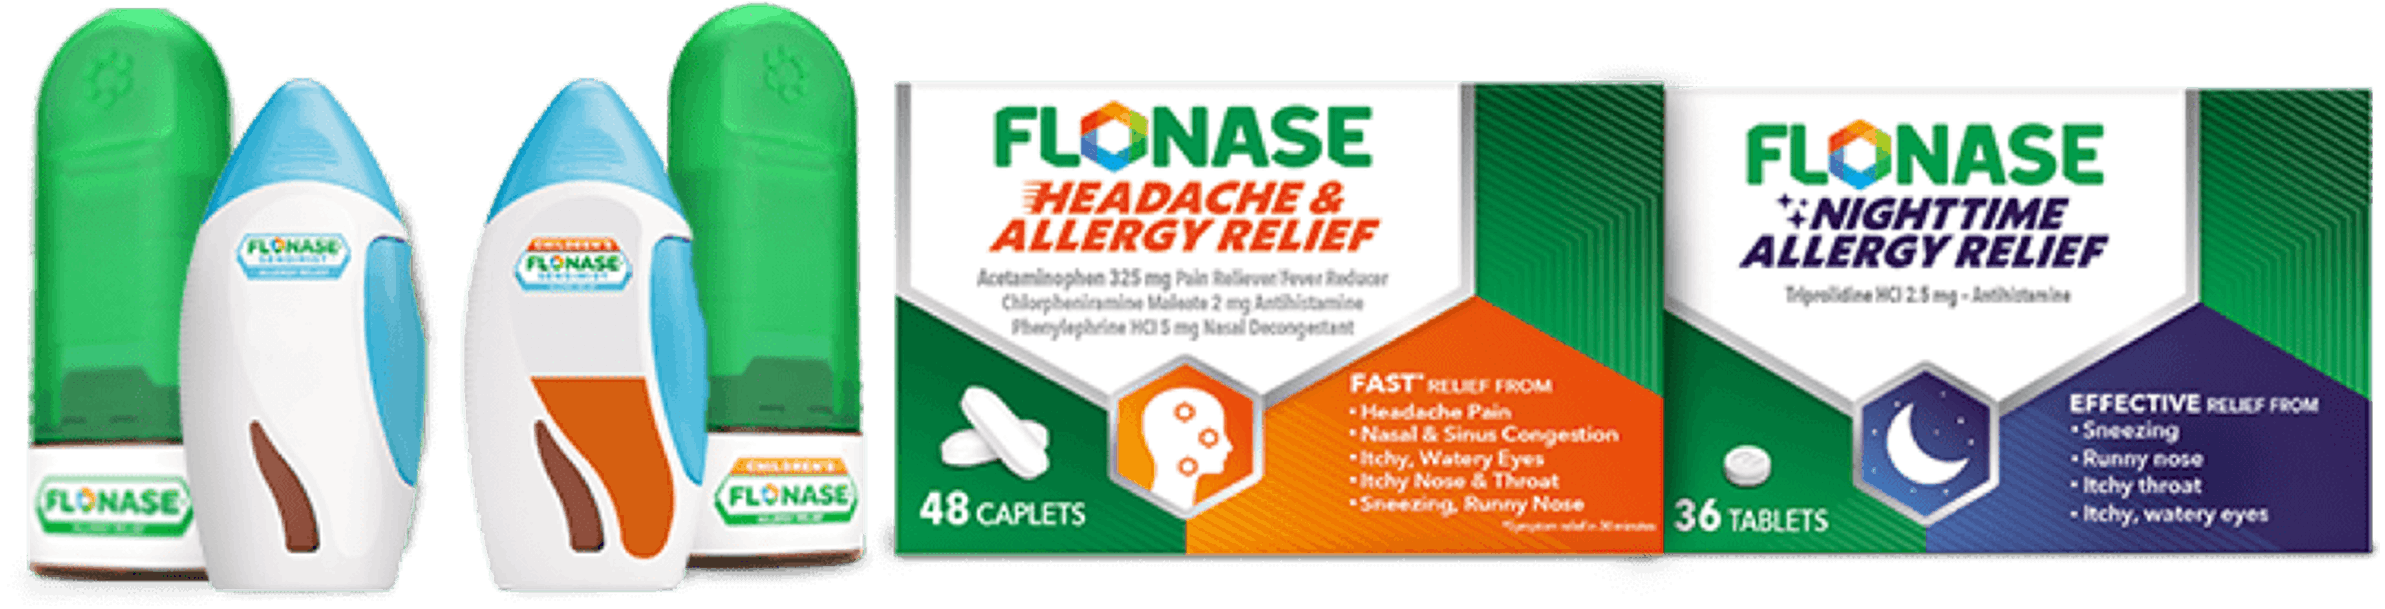 FLONASE allergy relief products for adults and children